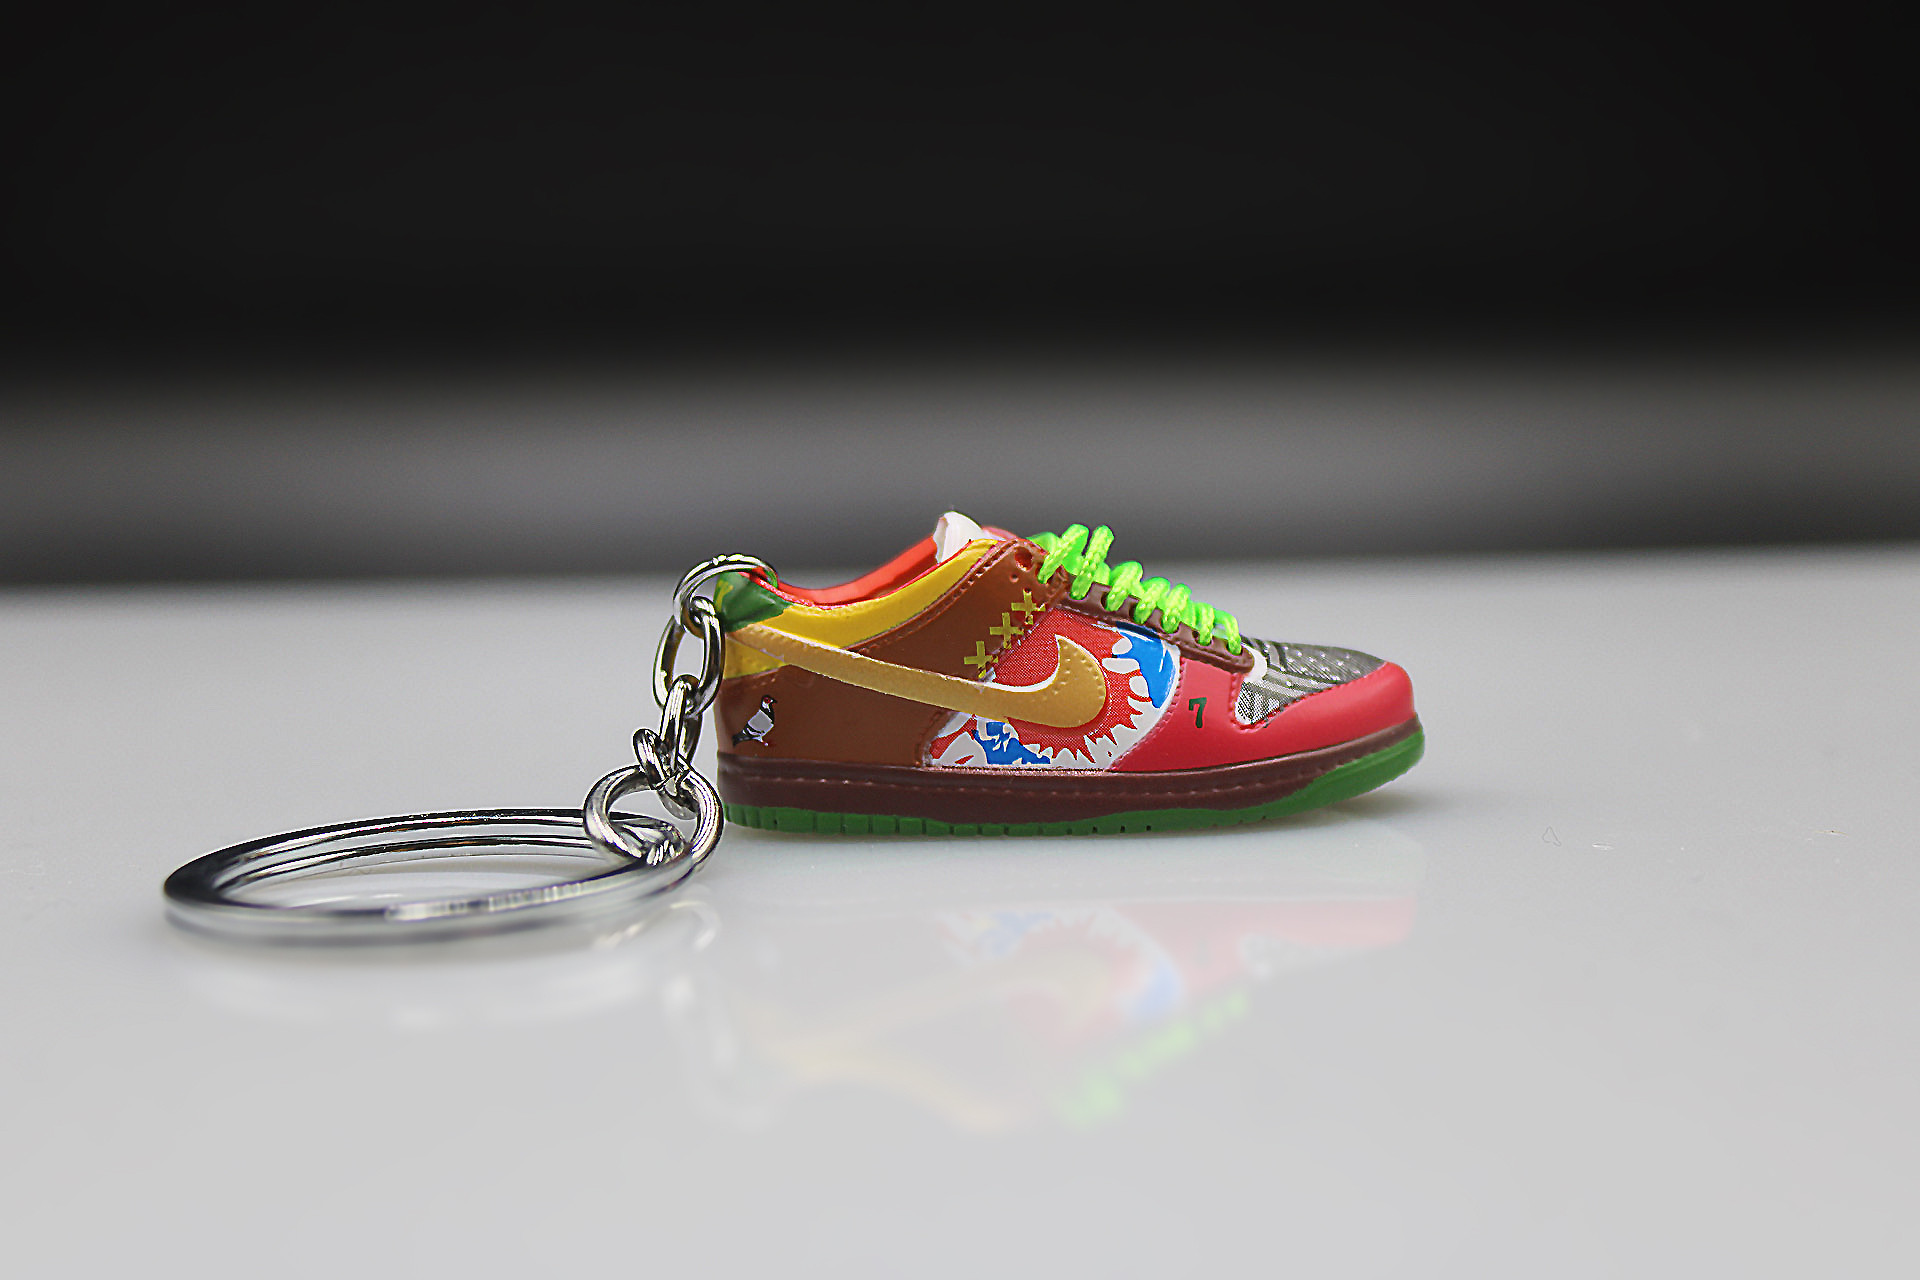 Porte-clés Sneakers 3D - Nike Dunk SB Low - What The Dunk